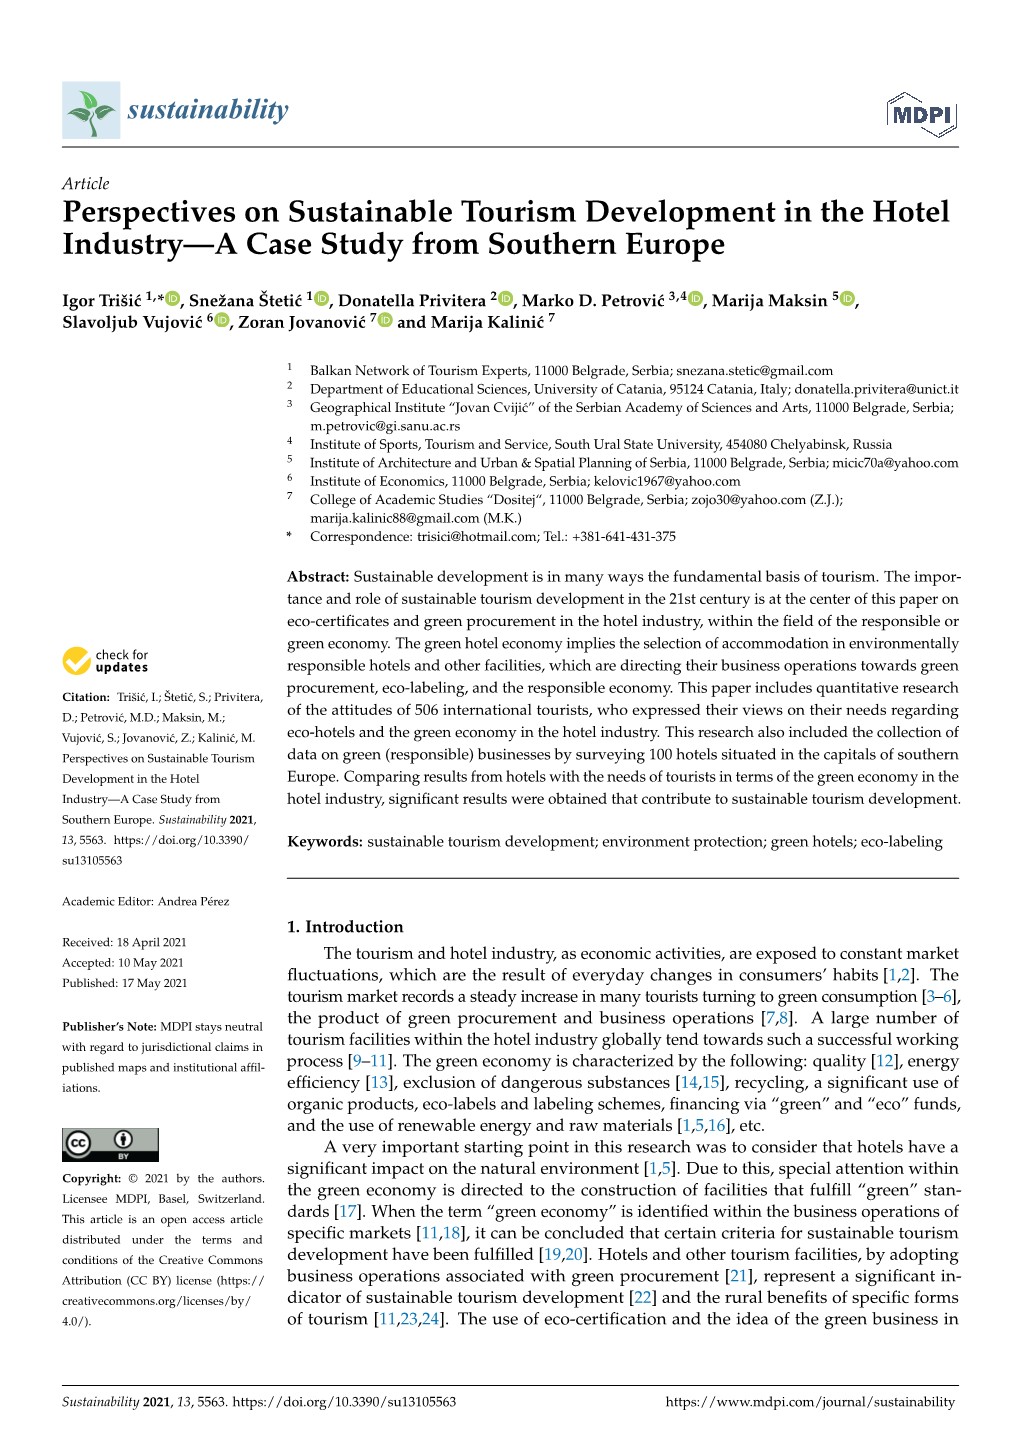 Perspectives on Sustainable Tourism Development in the Hotel Industry—A Case Study from Southern Europe